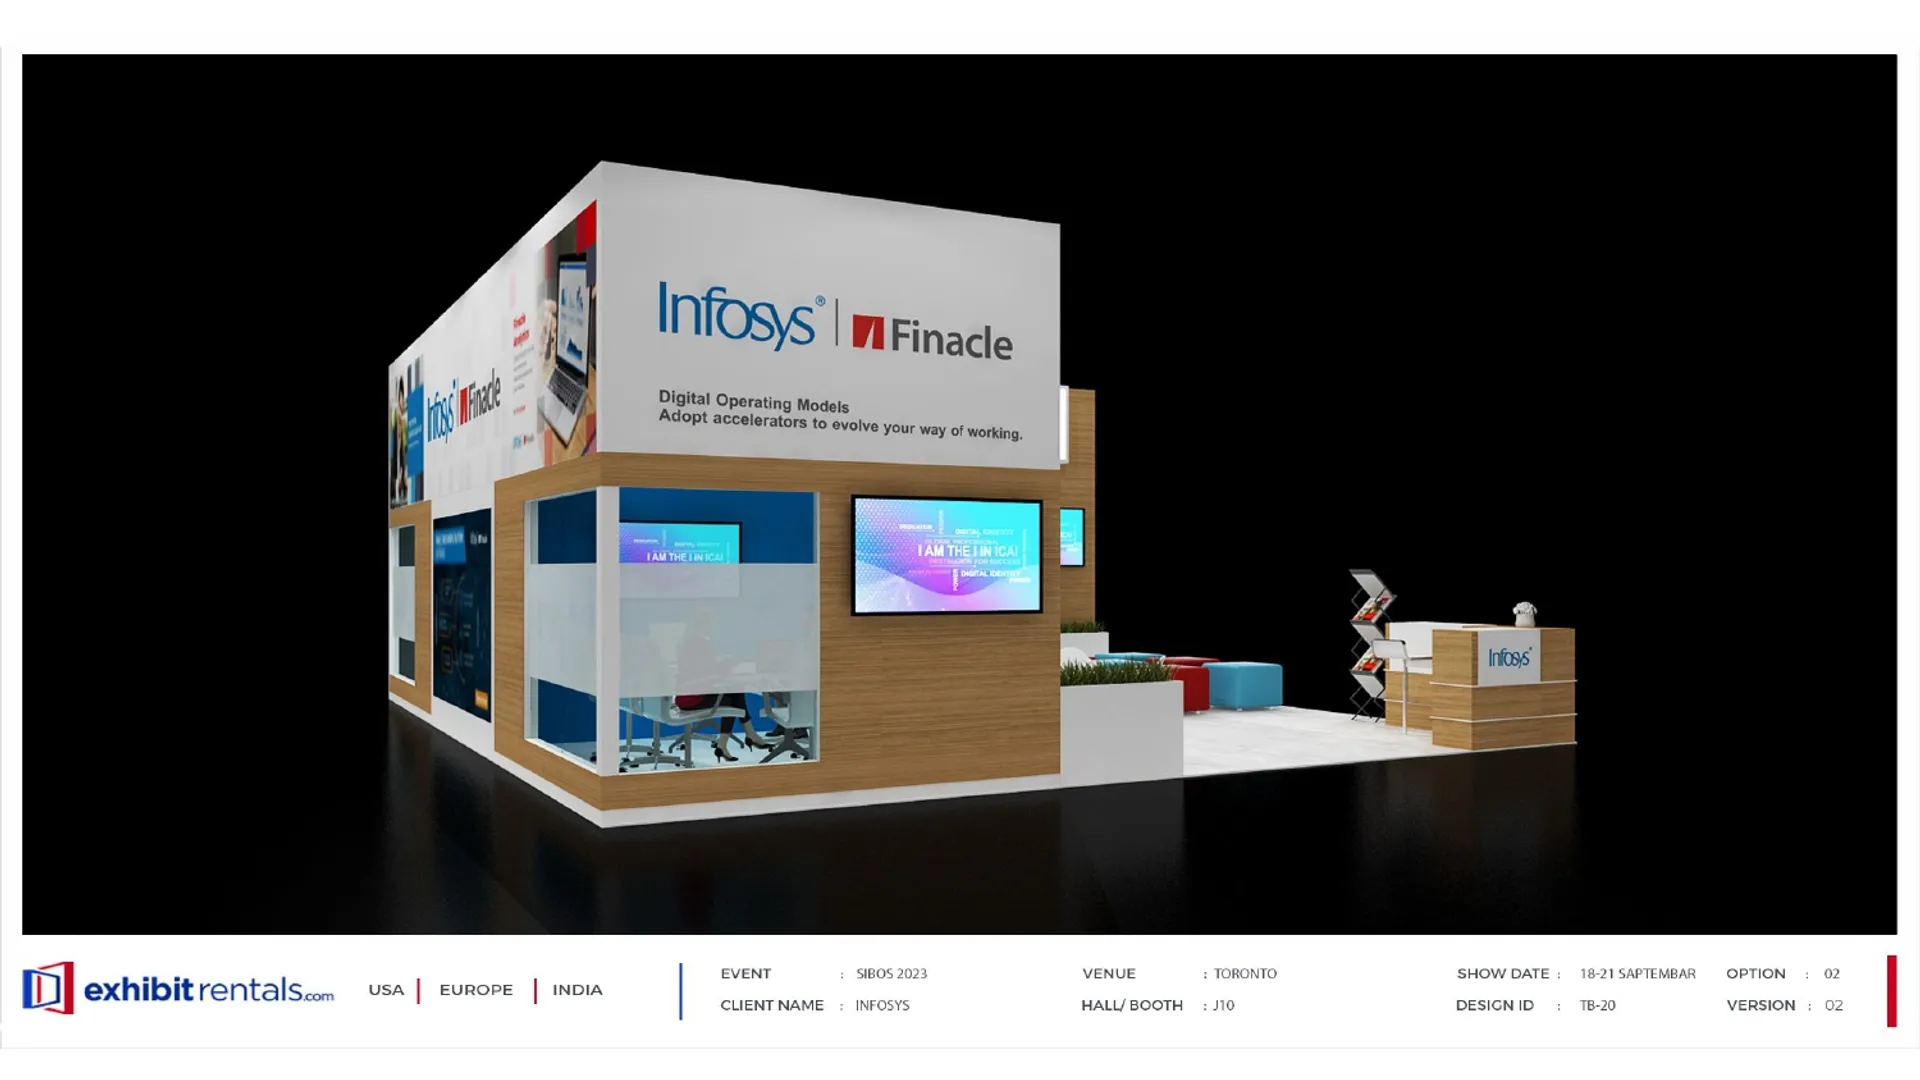 booth-design-projects/Exhibit-Rentals/2024-04-17-30x40-PENINSULA-Project-98/2.2 - Infosys - ER Design Presentation.pptx-13_page-0001-u06fis.jpg